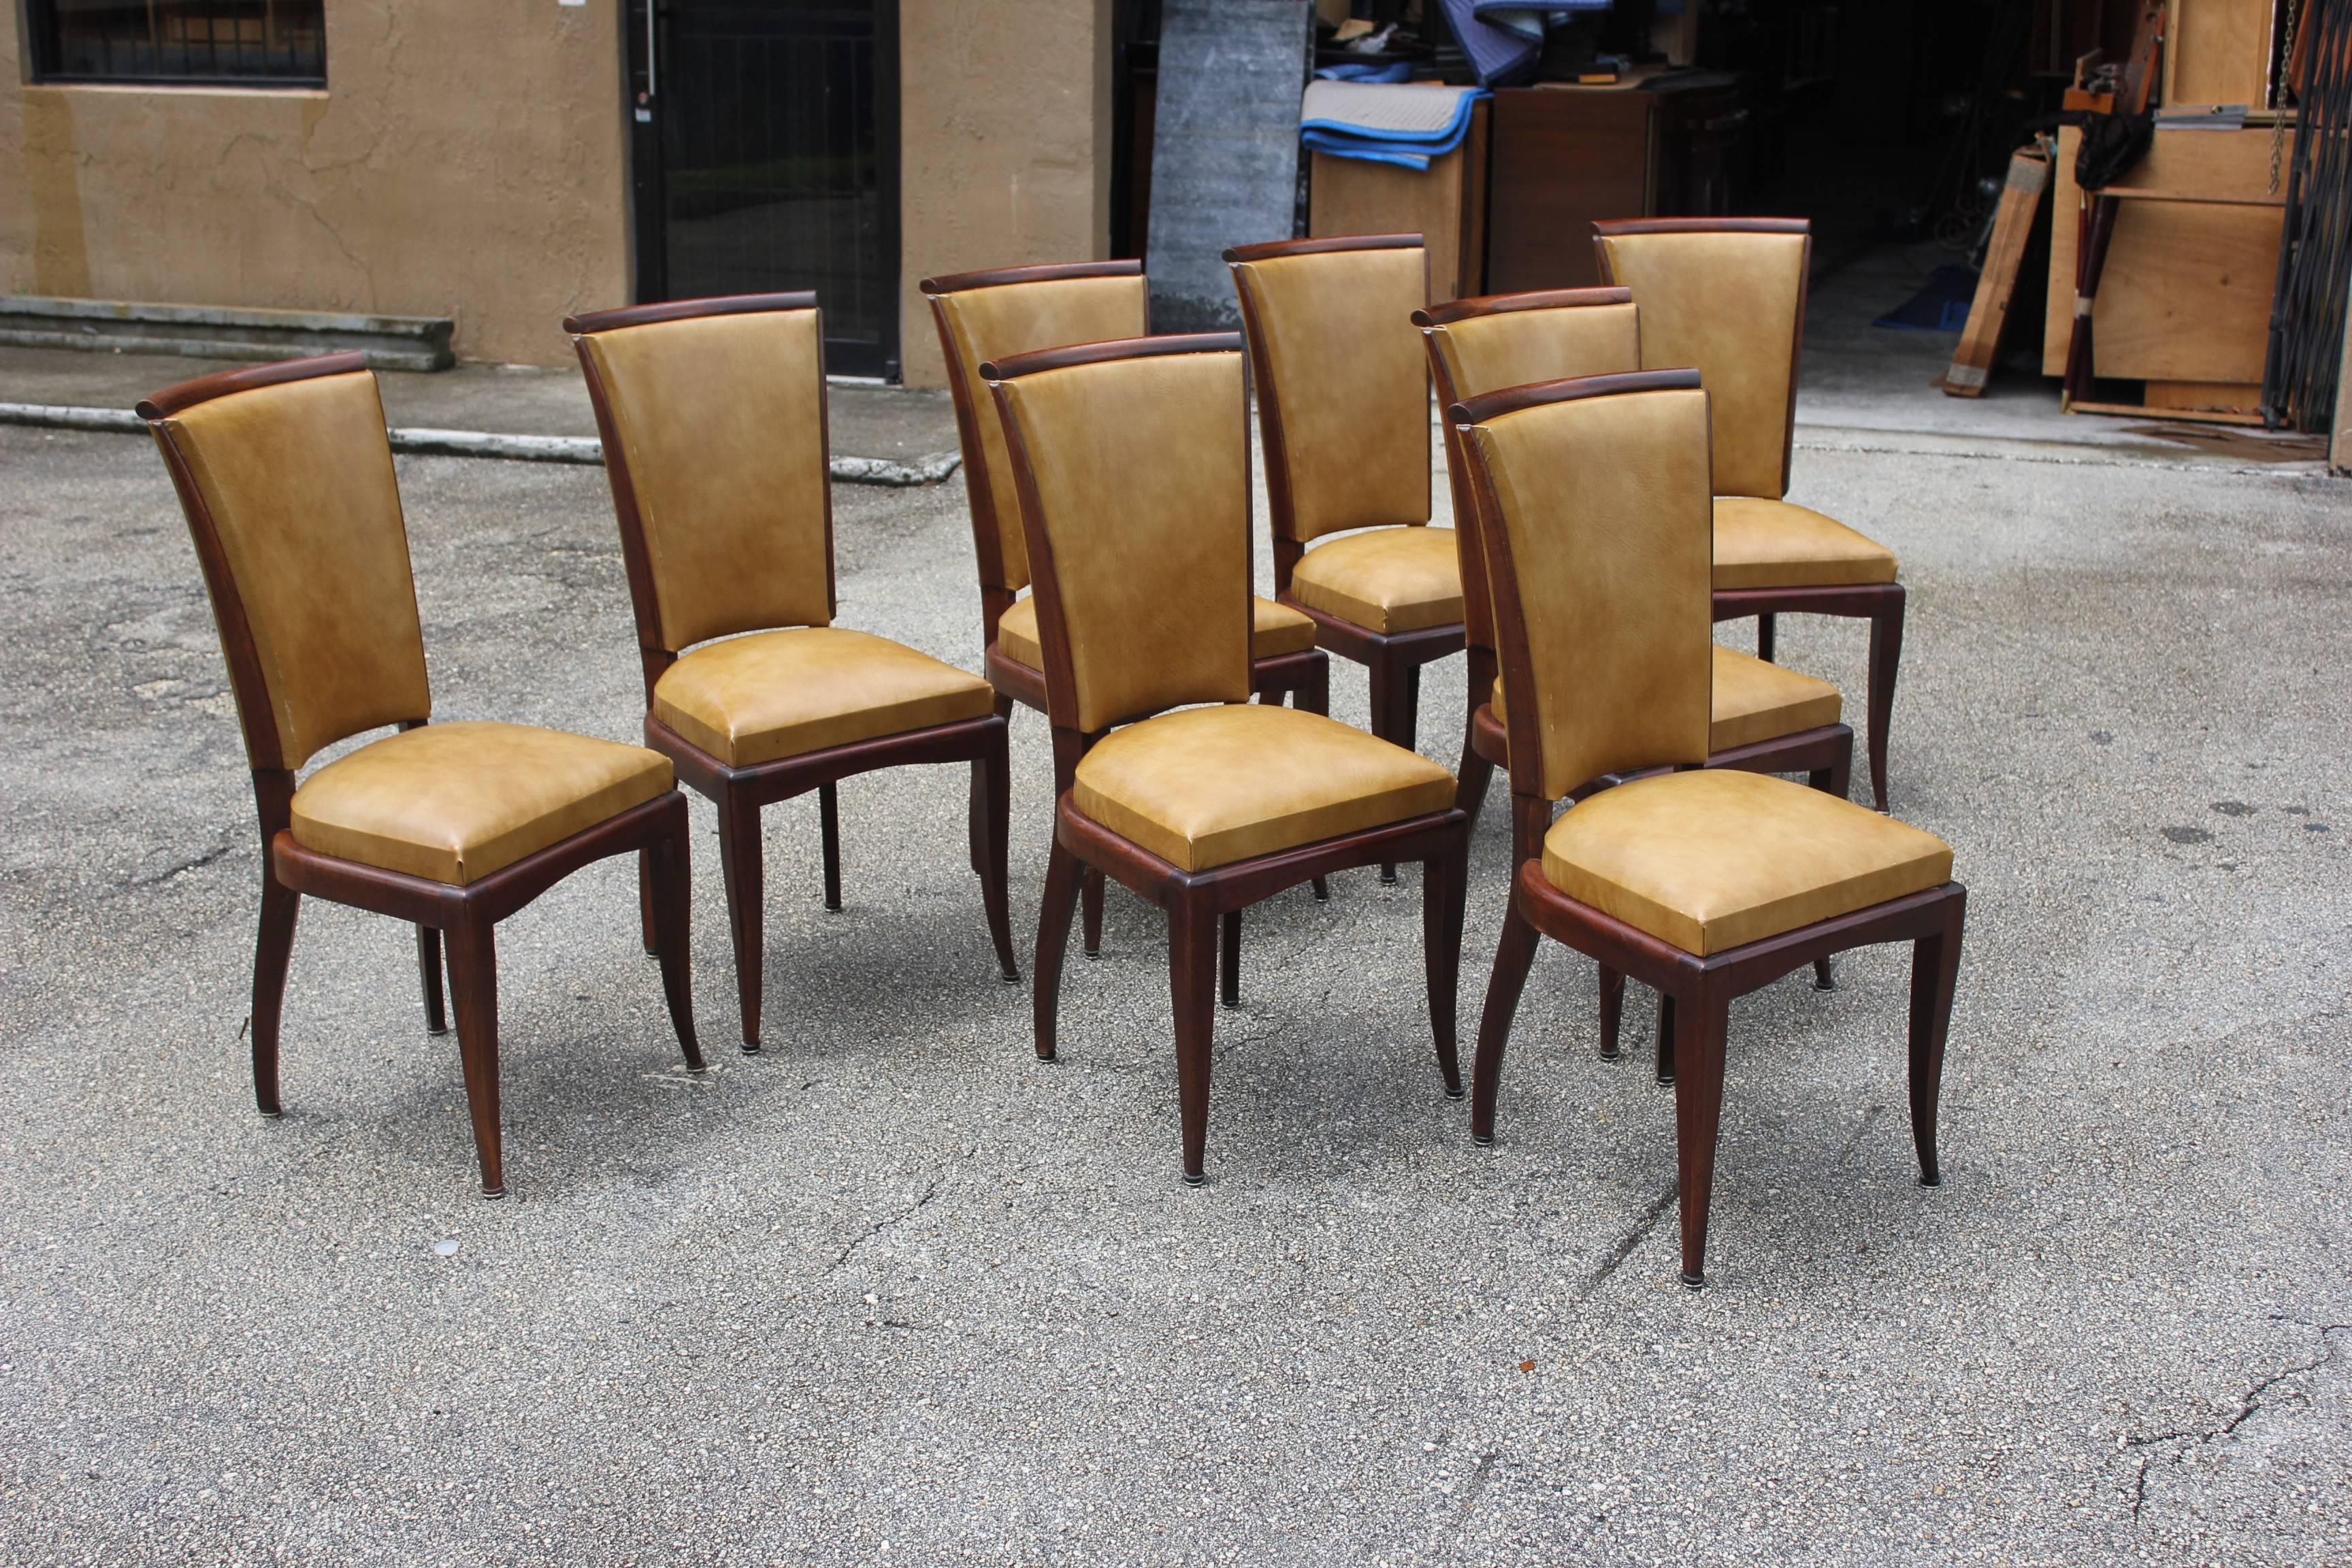 Suite of eight French Art Deco dining chairs style of Jules Leleu, solid mahogany, beautiful chairs. Reupholster is vinyl recommended, circa 1940 from France, Paris. Beautiful chairs.